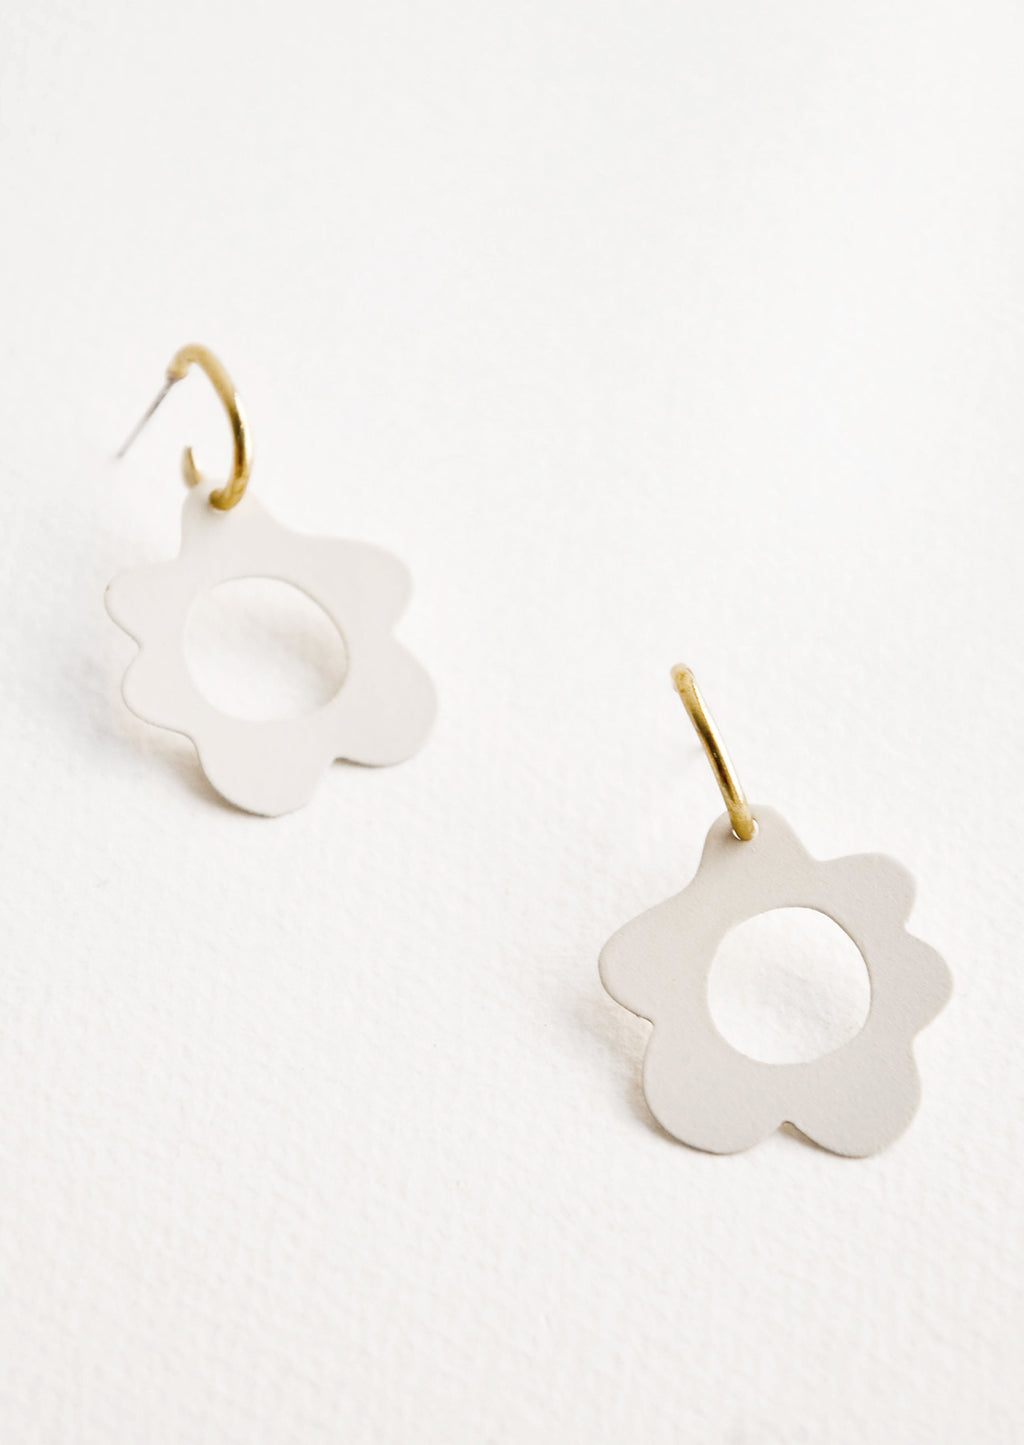 Cream: White flower shaped earrings with circular cutouts on small brass open hoops.